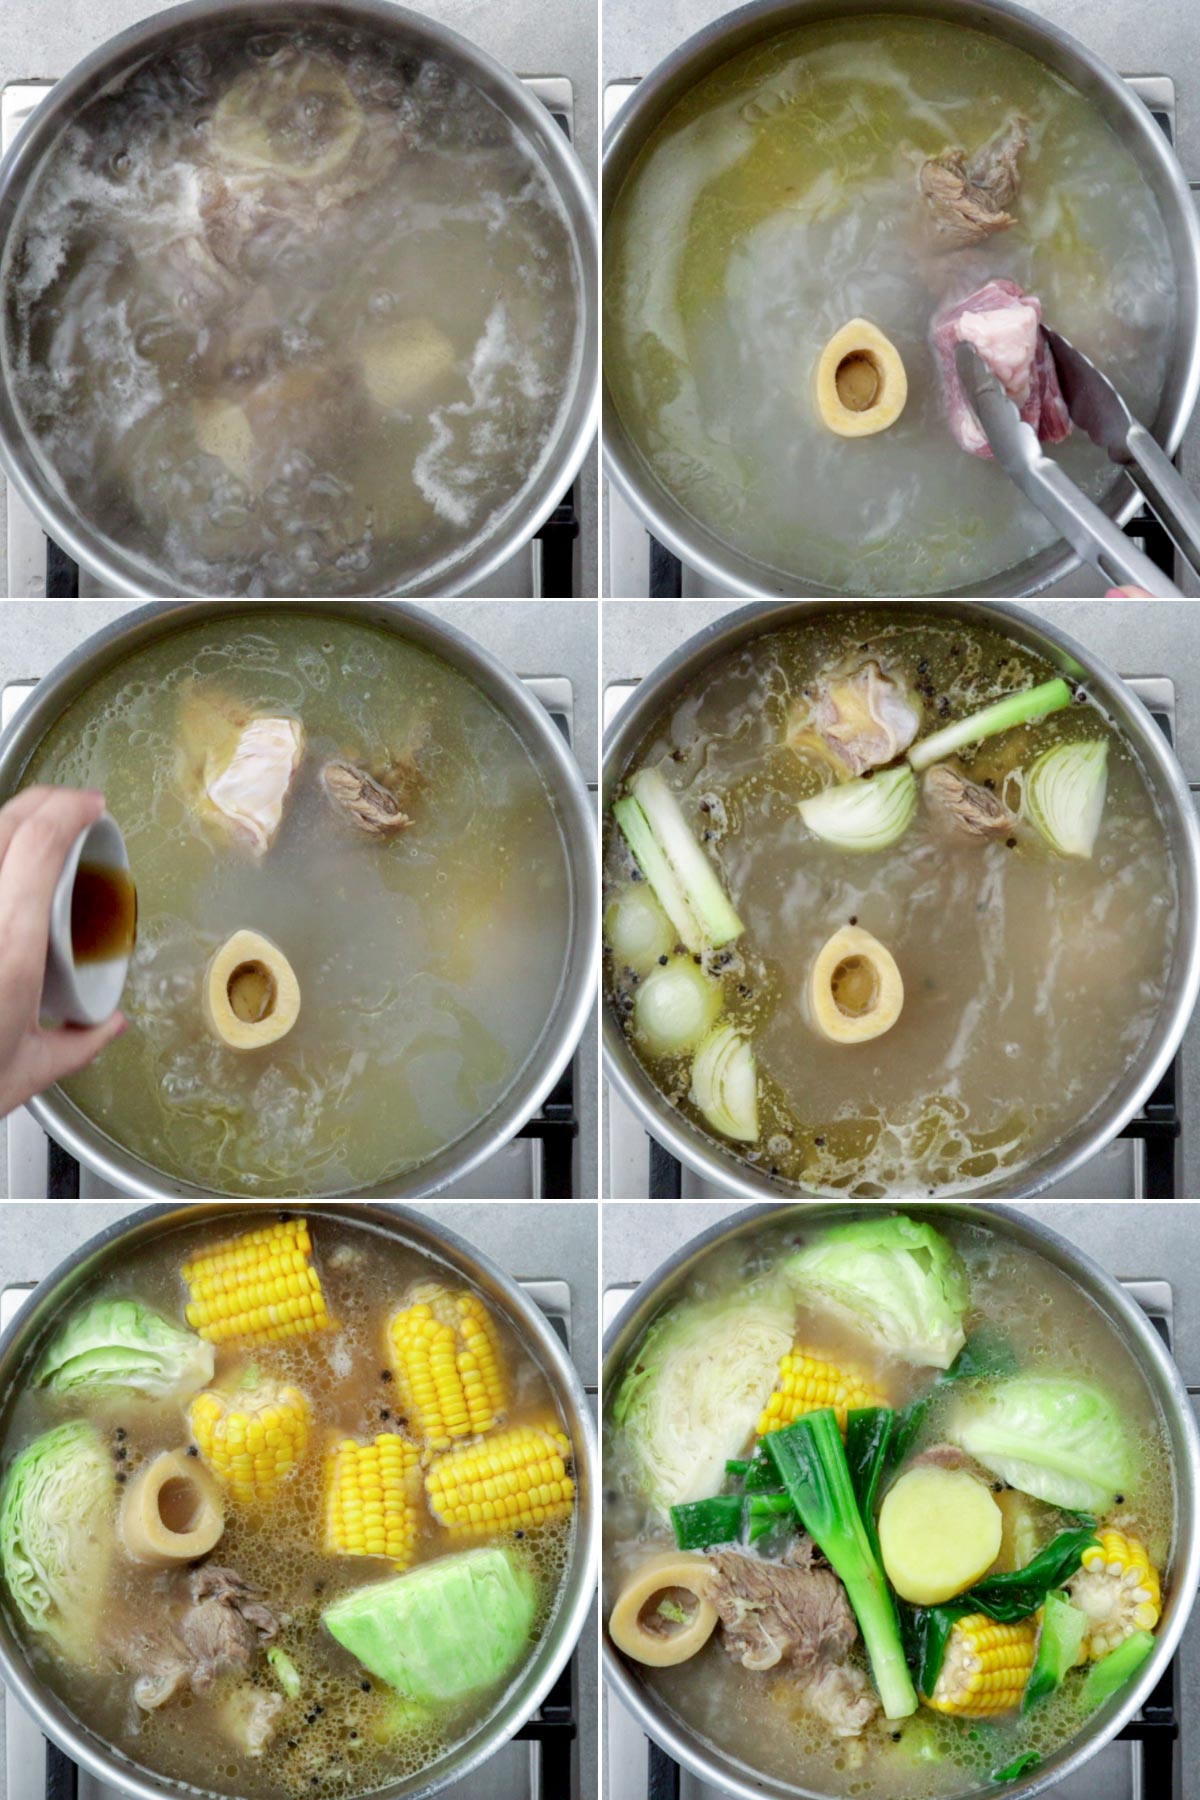 Steps on how to cook bulalo soup.